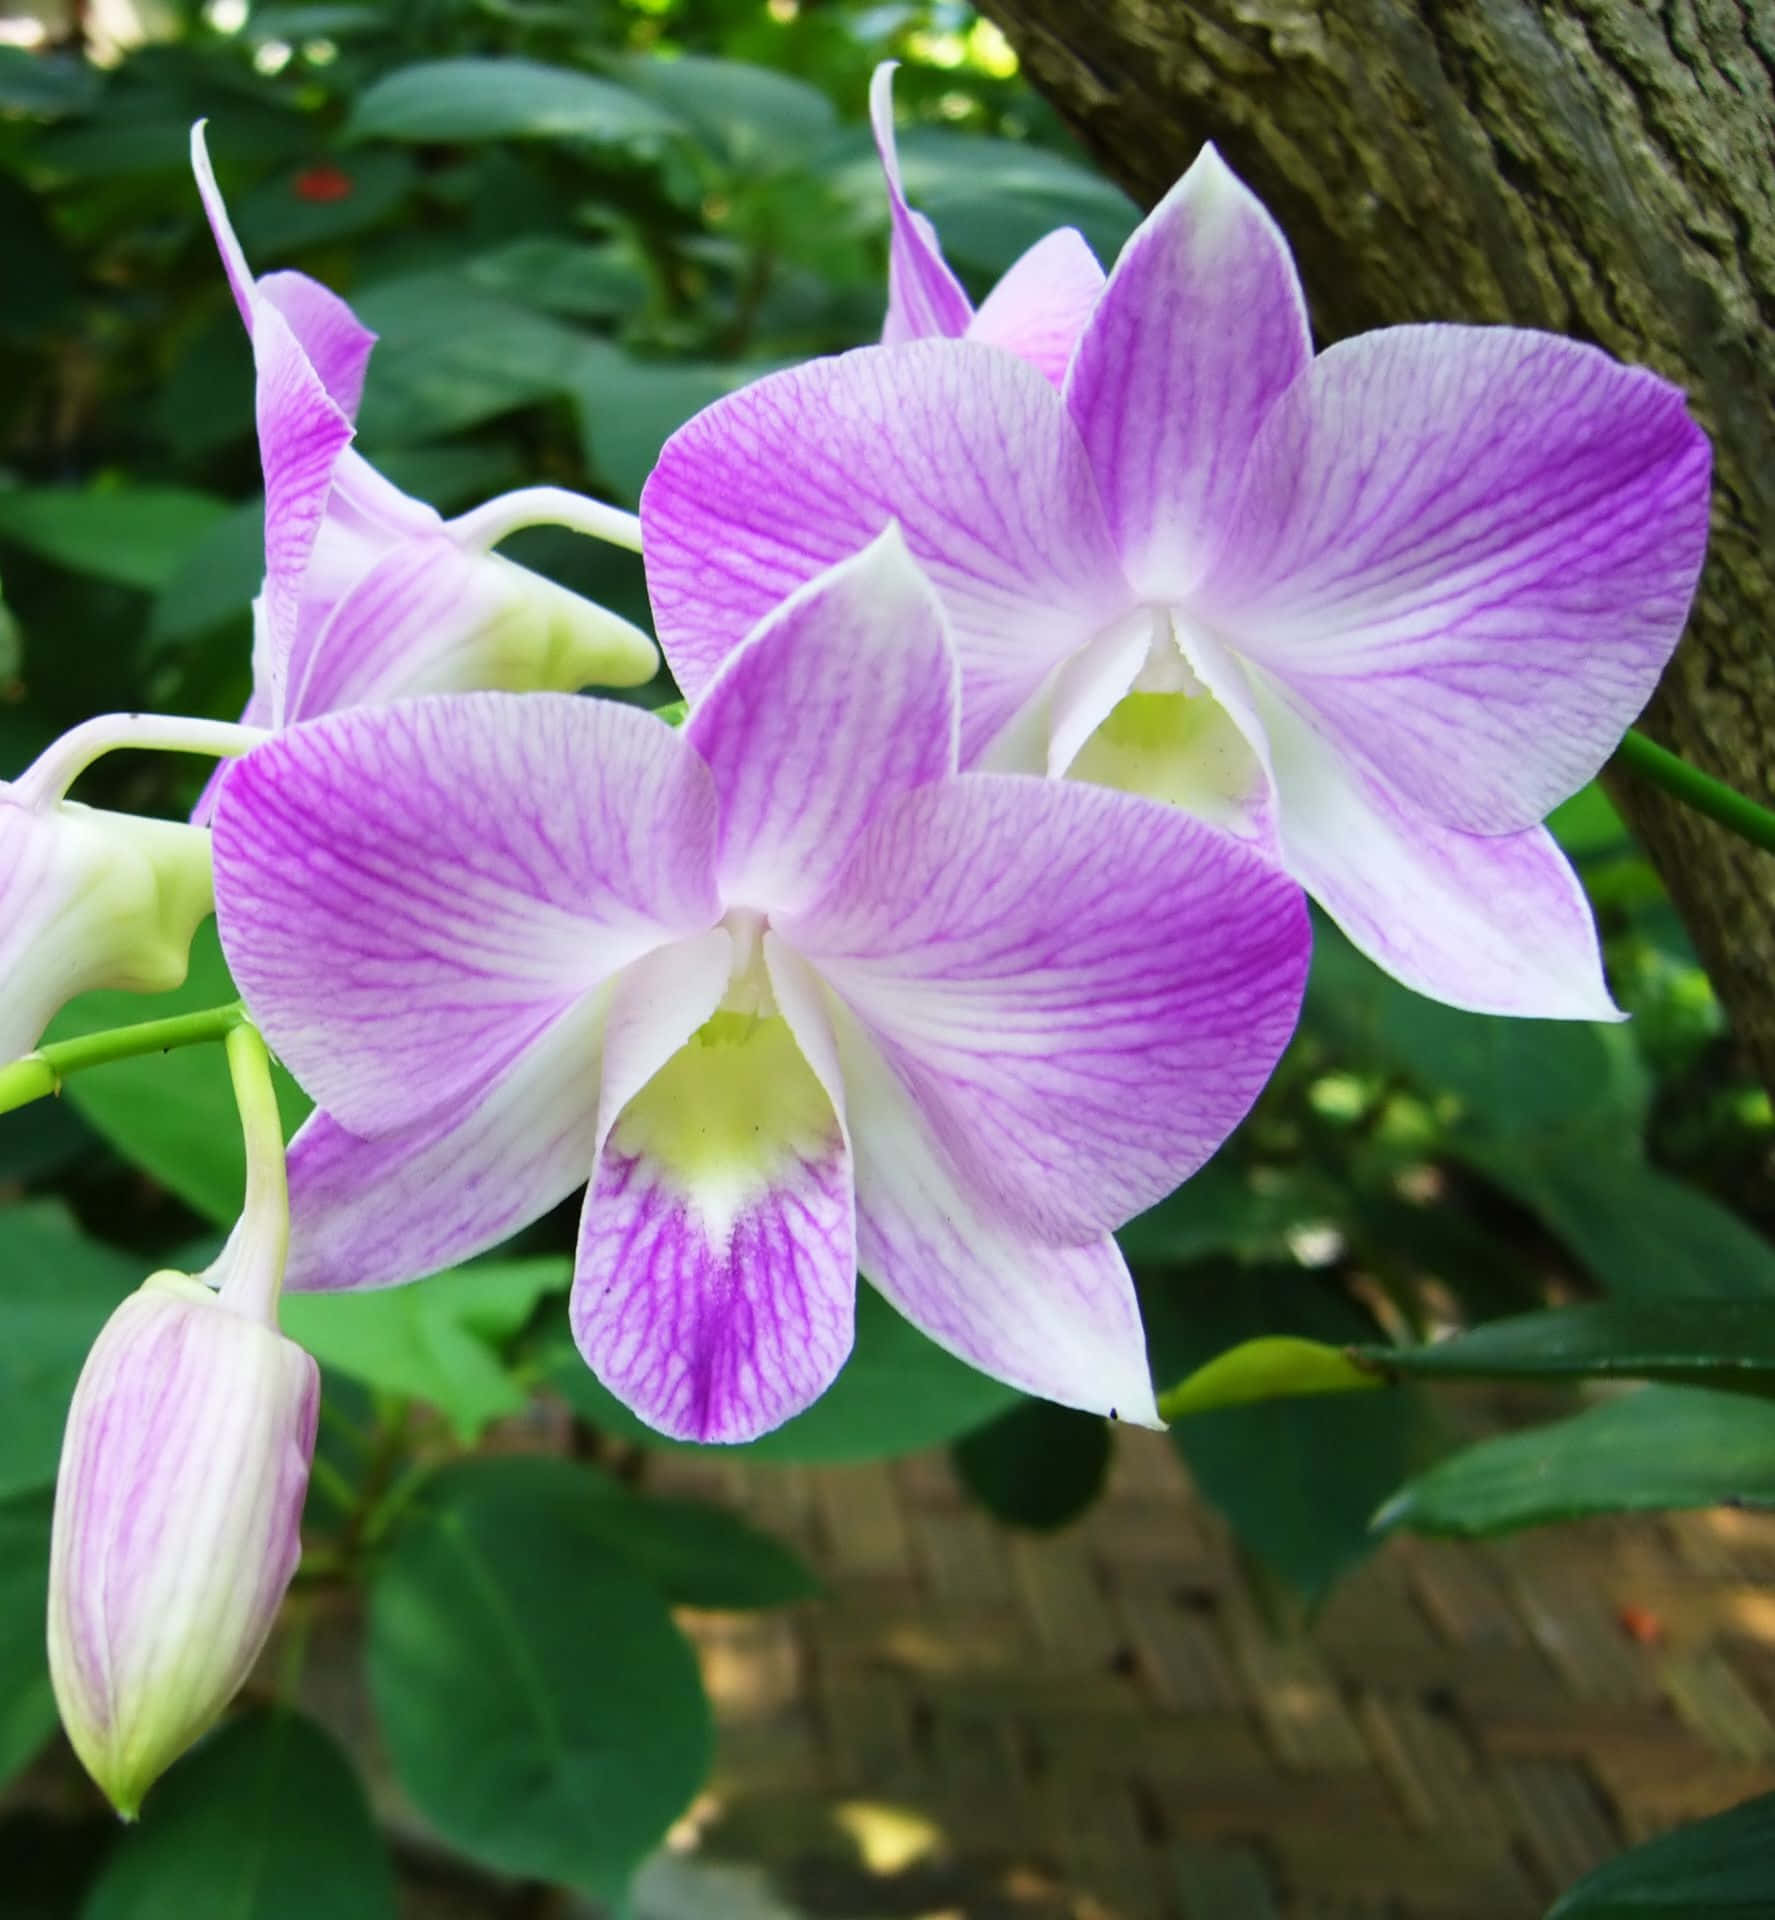 A beautiful Orchid flower blooming in the colors of pink, purple and white